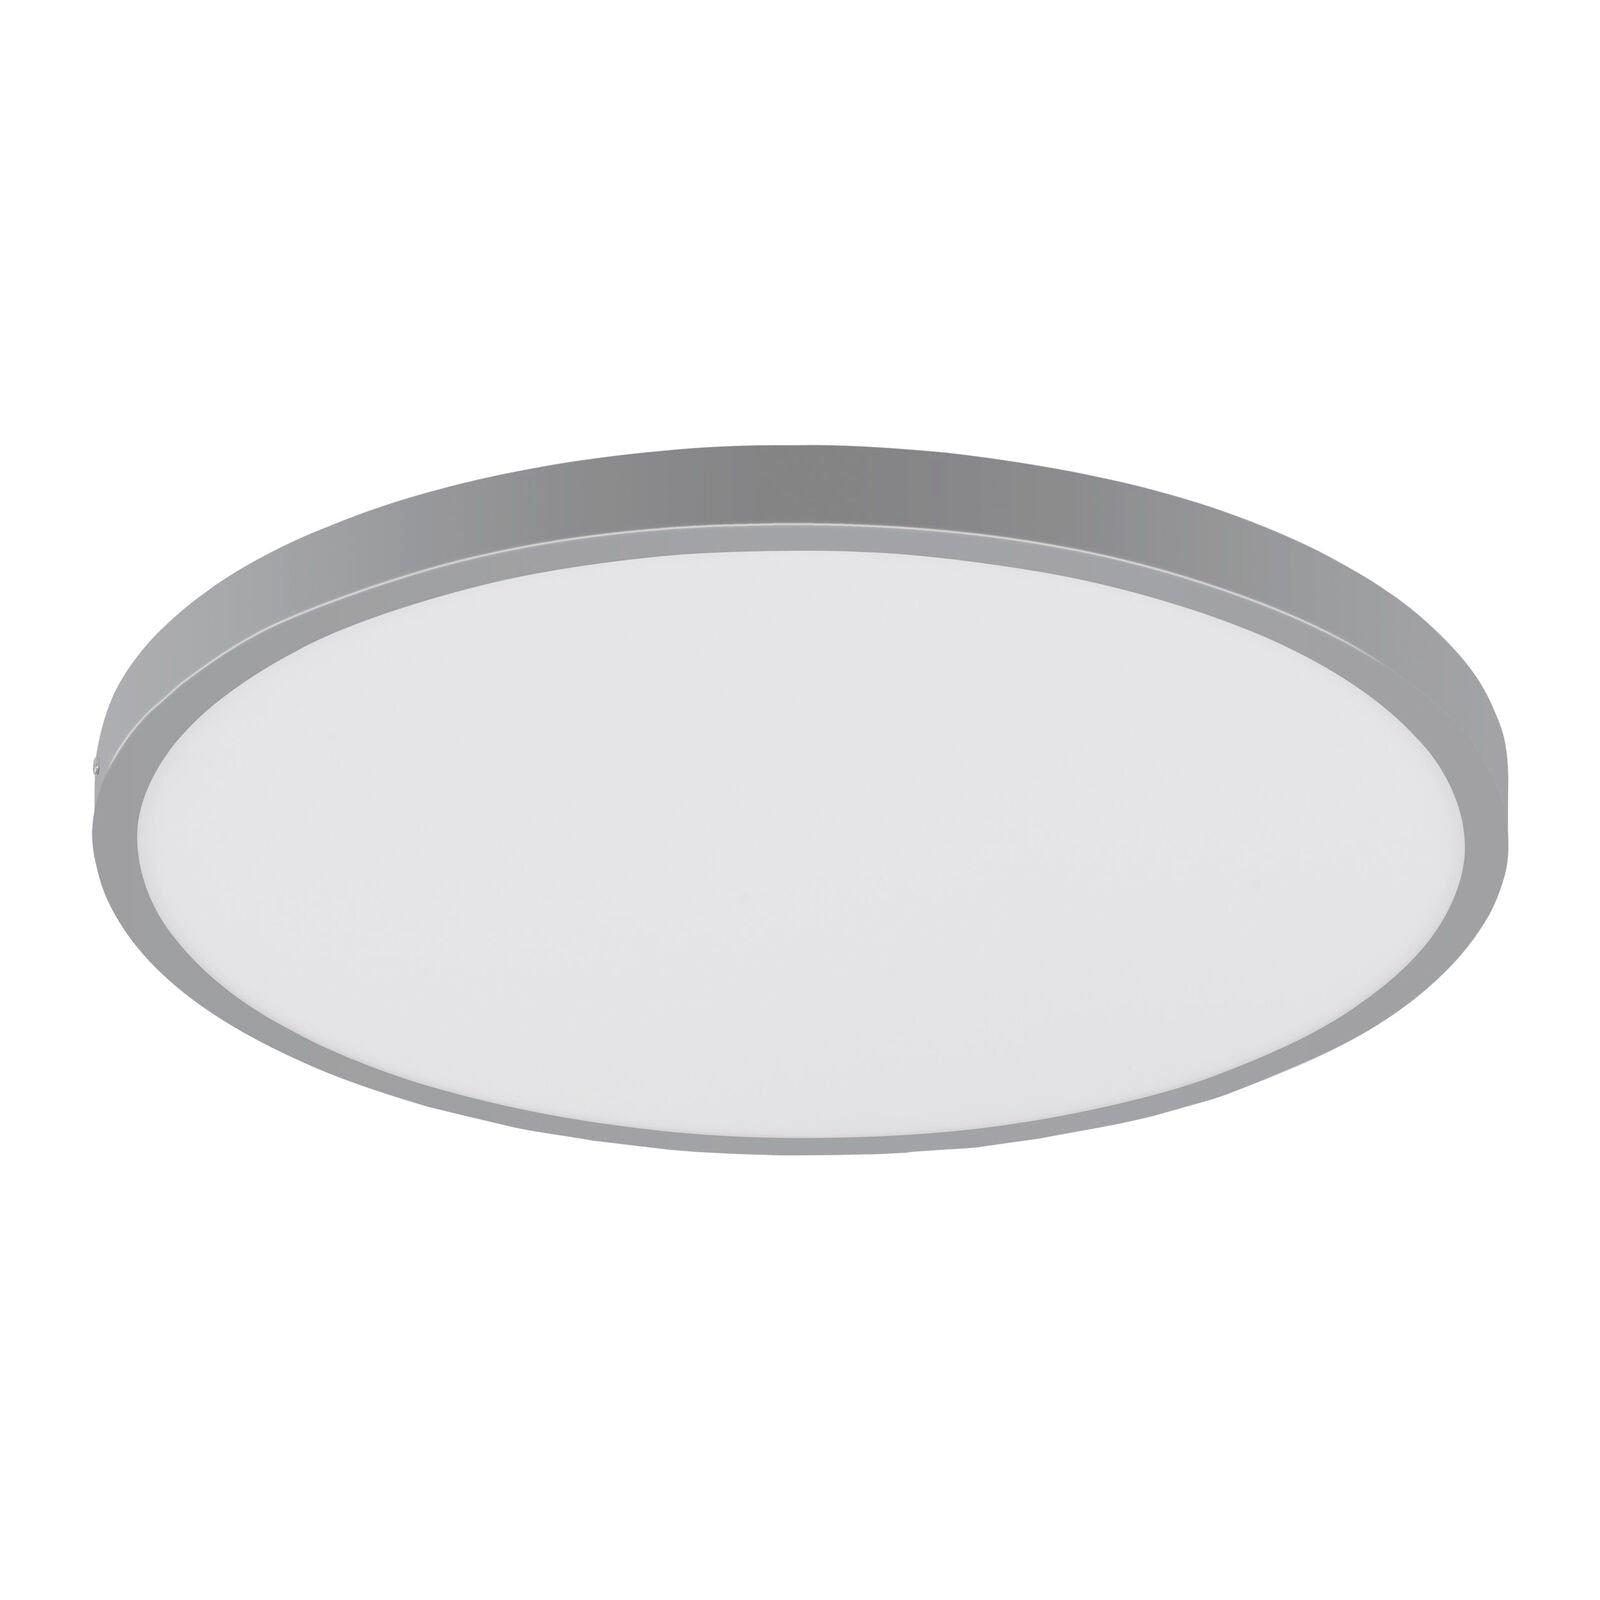 Wall / Ceiling Light Silver 400mm Round Surface Mounted 25W LED 4000K